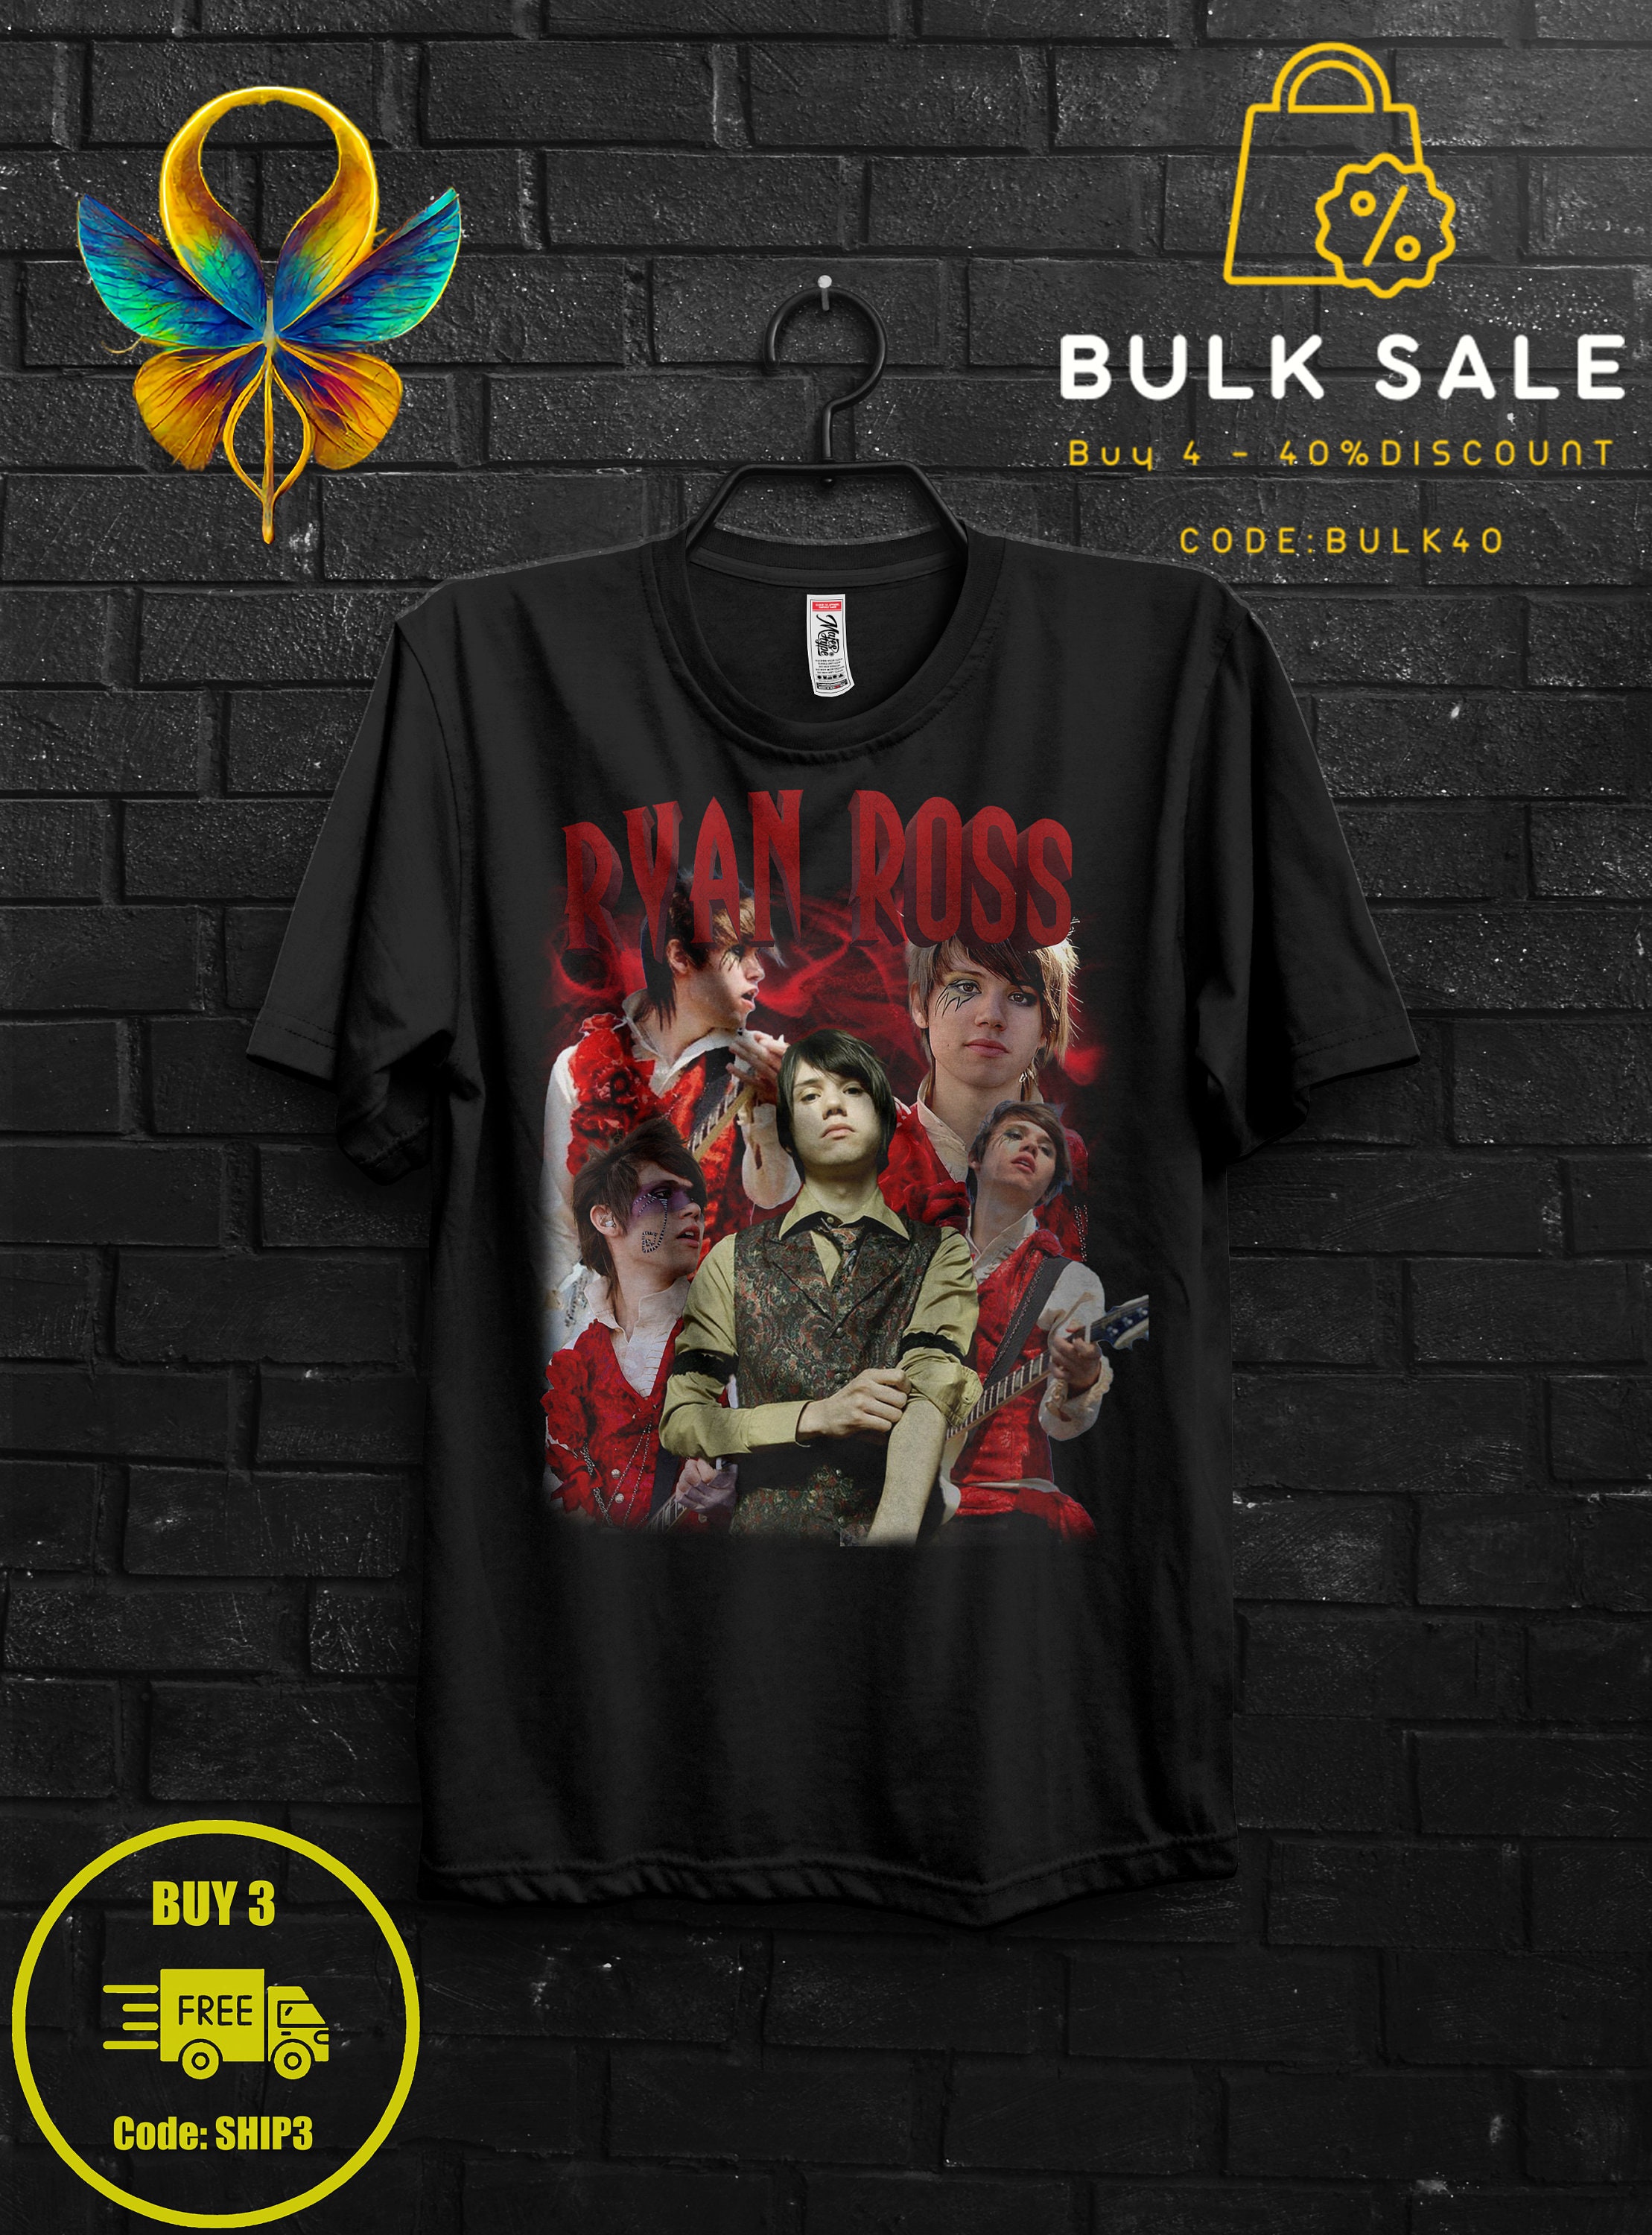 Ryan Ross Fan Gift TShirt,The Young Veins Emo Tee,Brendon Urie and John Walker Shirt,Too Weird To Live Band,Afycso Appareal,Widespread Panic 1560938257